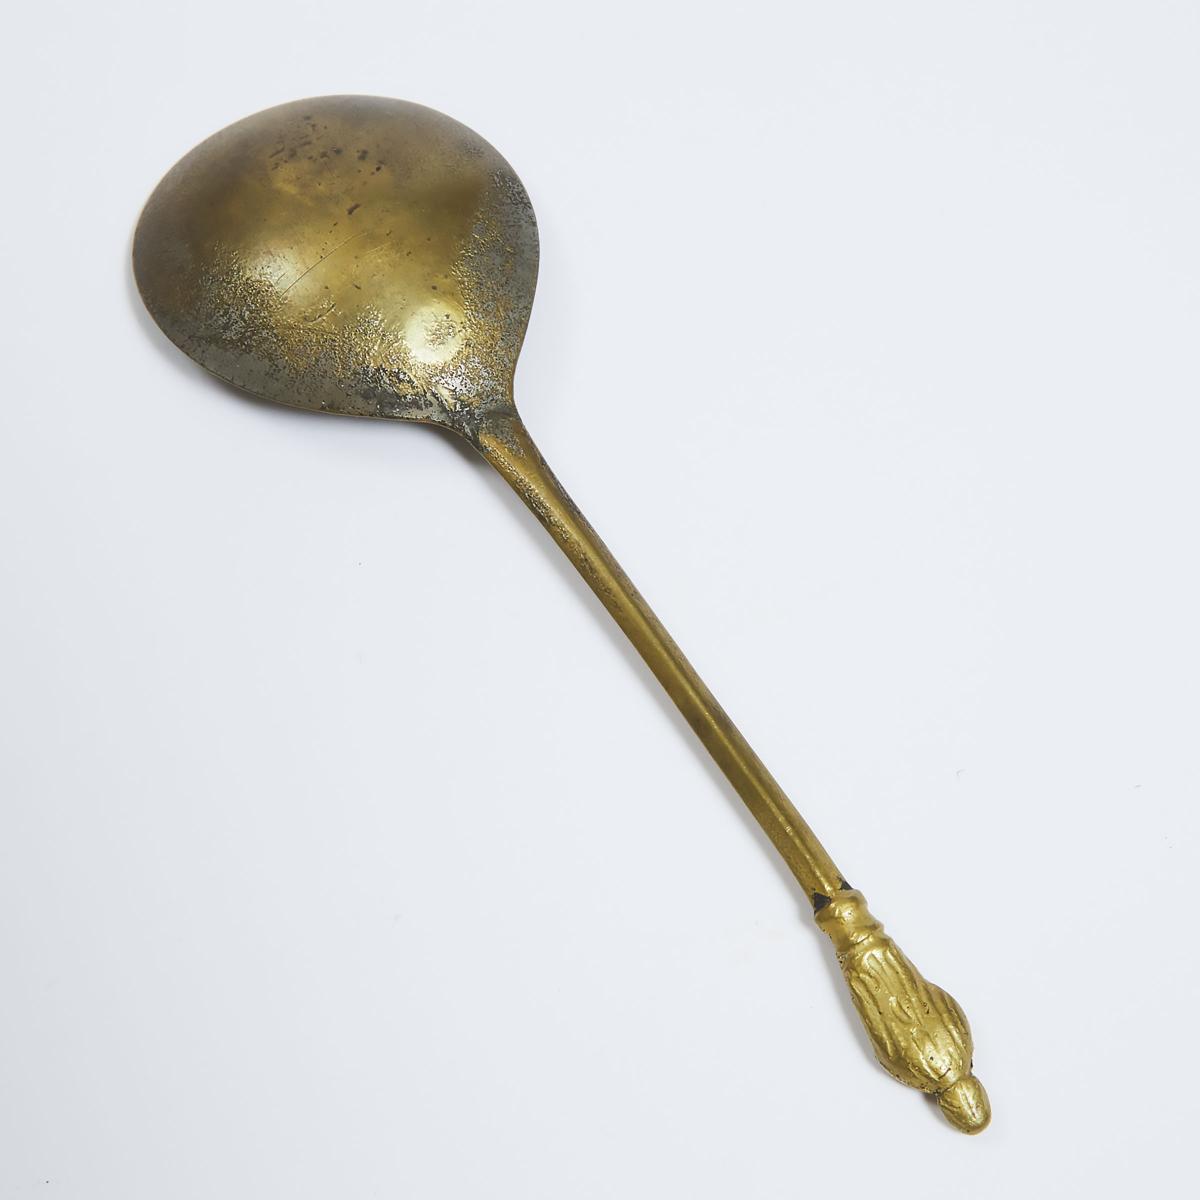 English Latten Apostle Spoon of St. Paul, early 17th century, length 7 in — 17.8 cm - Image 2 of 2